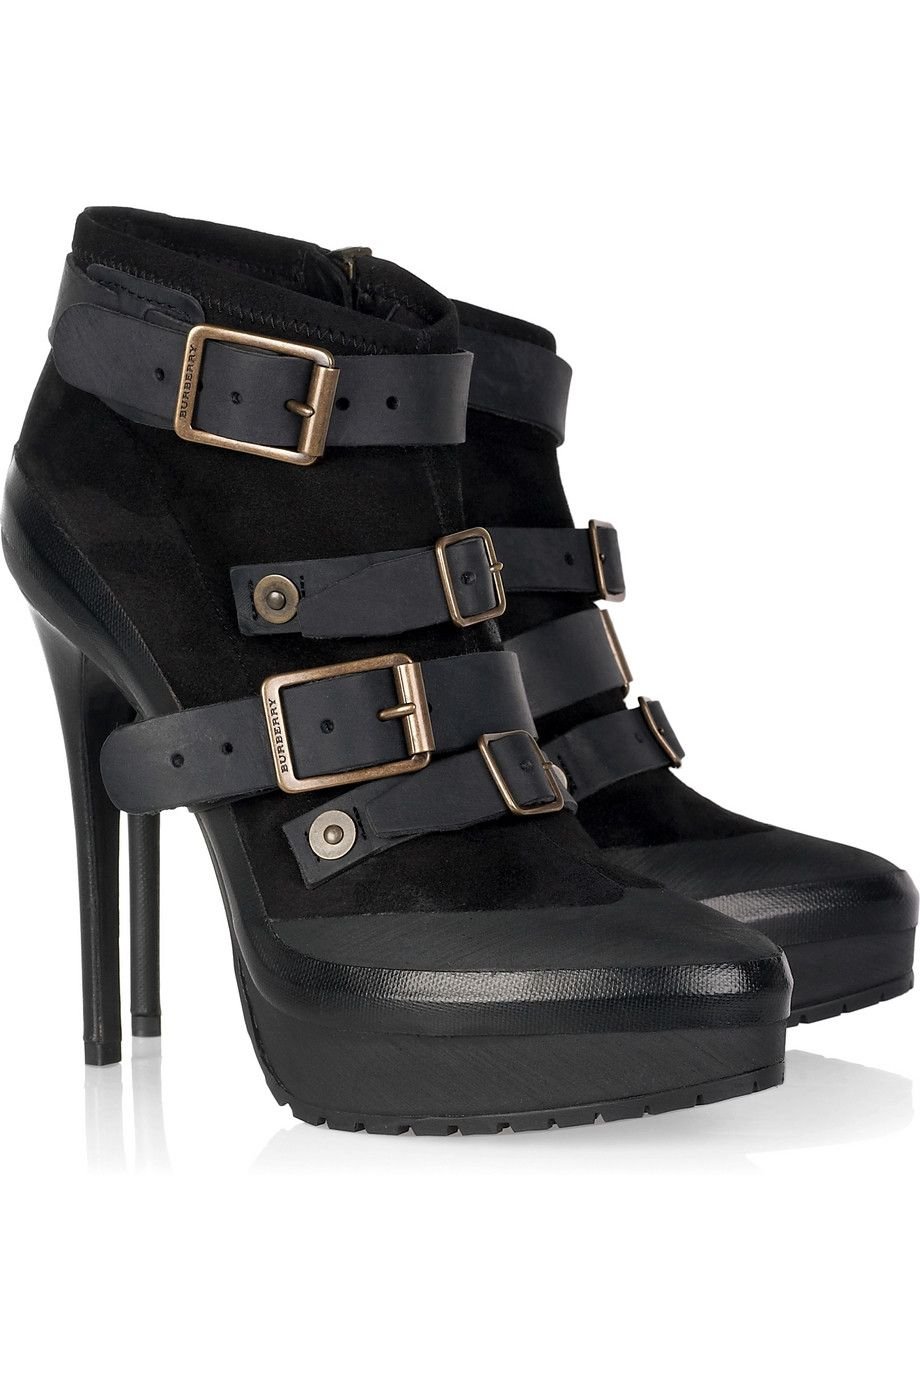 Burberry Prorsum Buckled Suede Ankle Boots.jpg